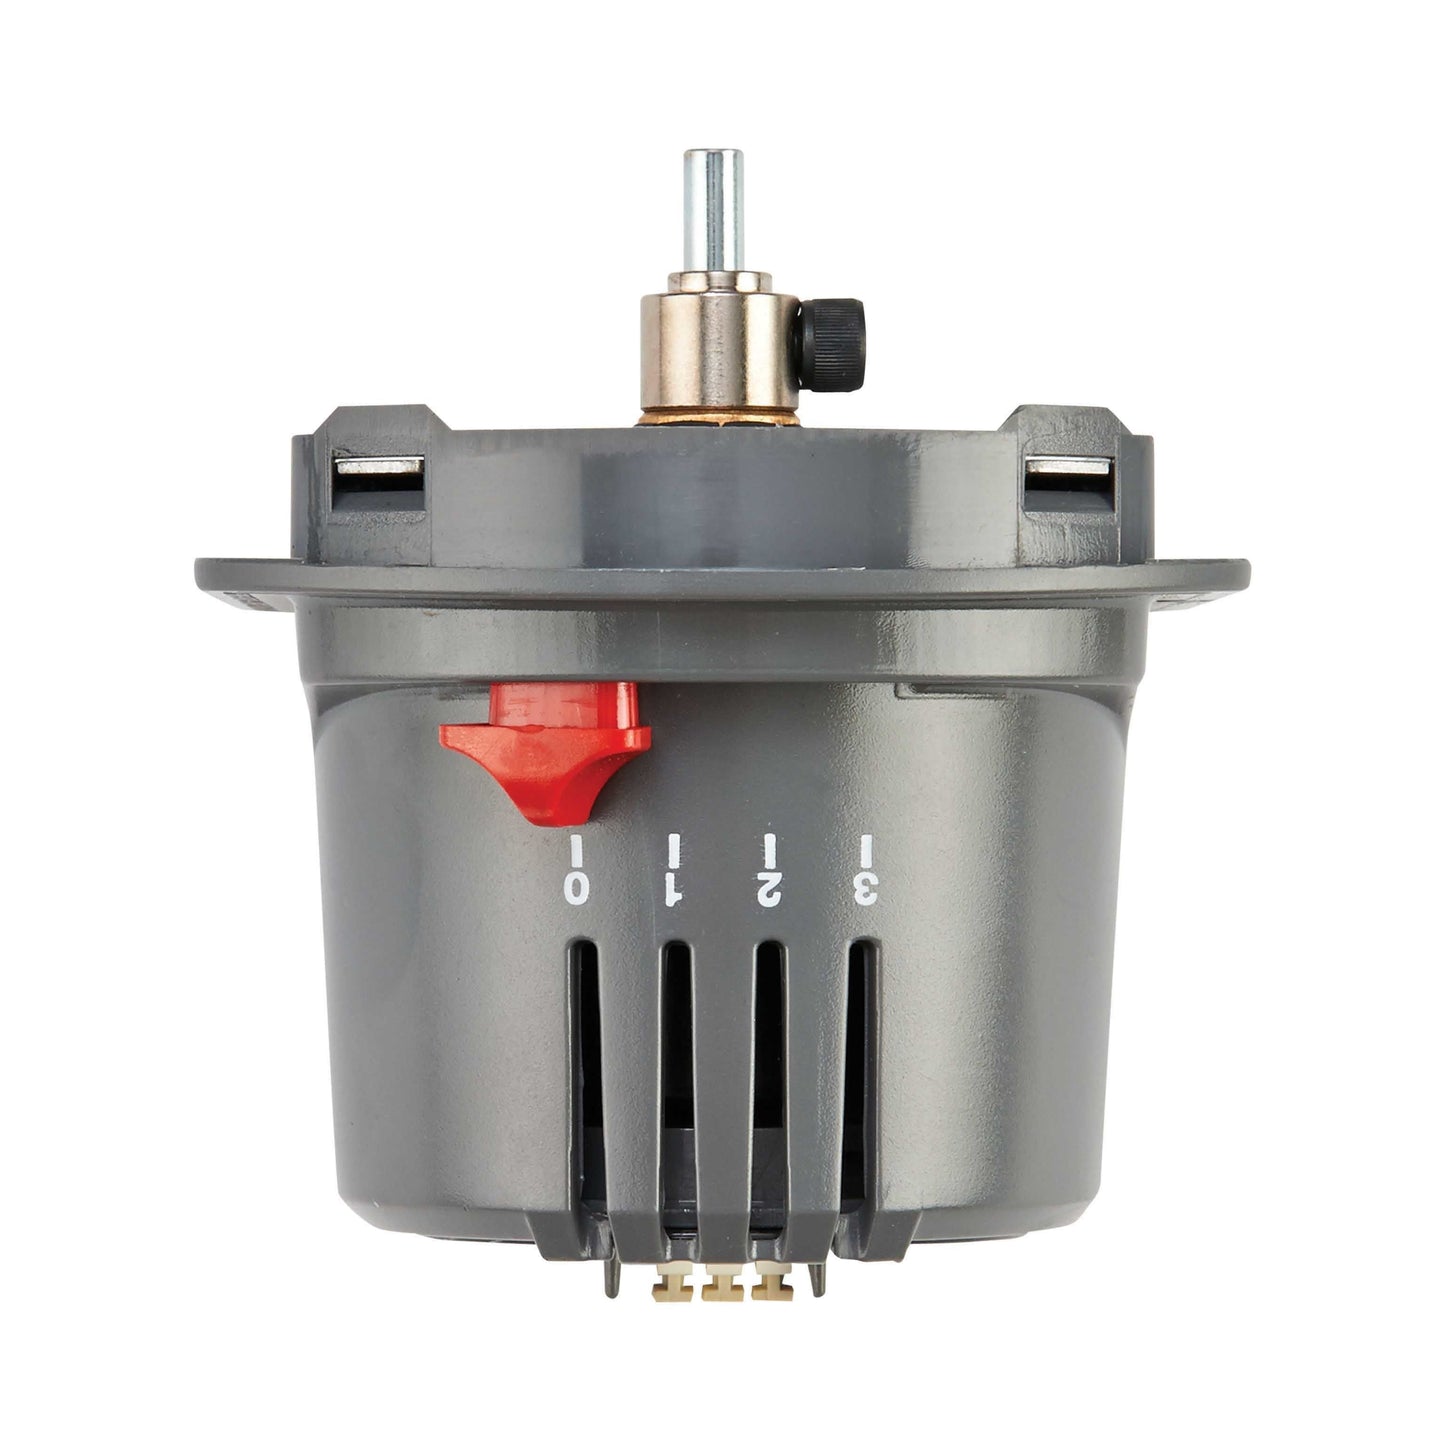 M847D-ZONE - Replacement Motor for ARD and ZD Zone Dampers